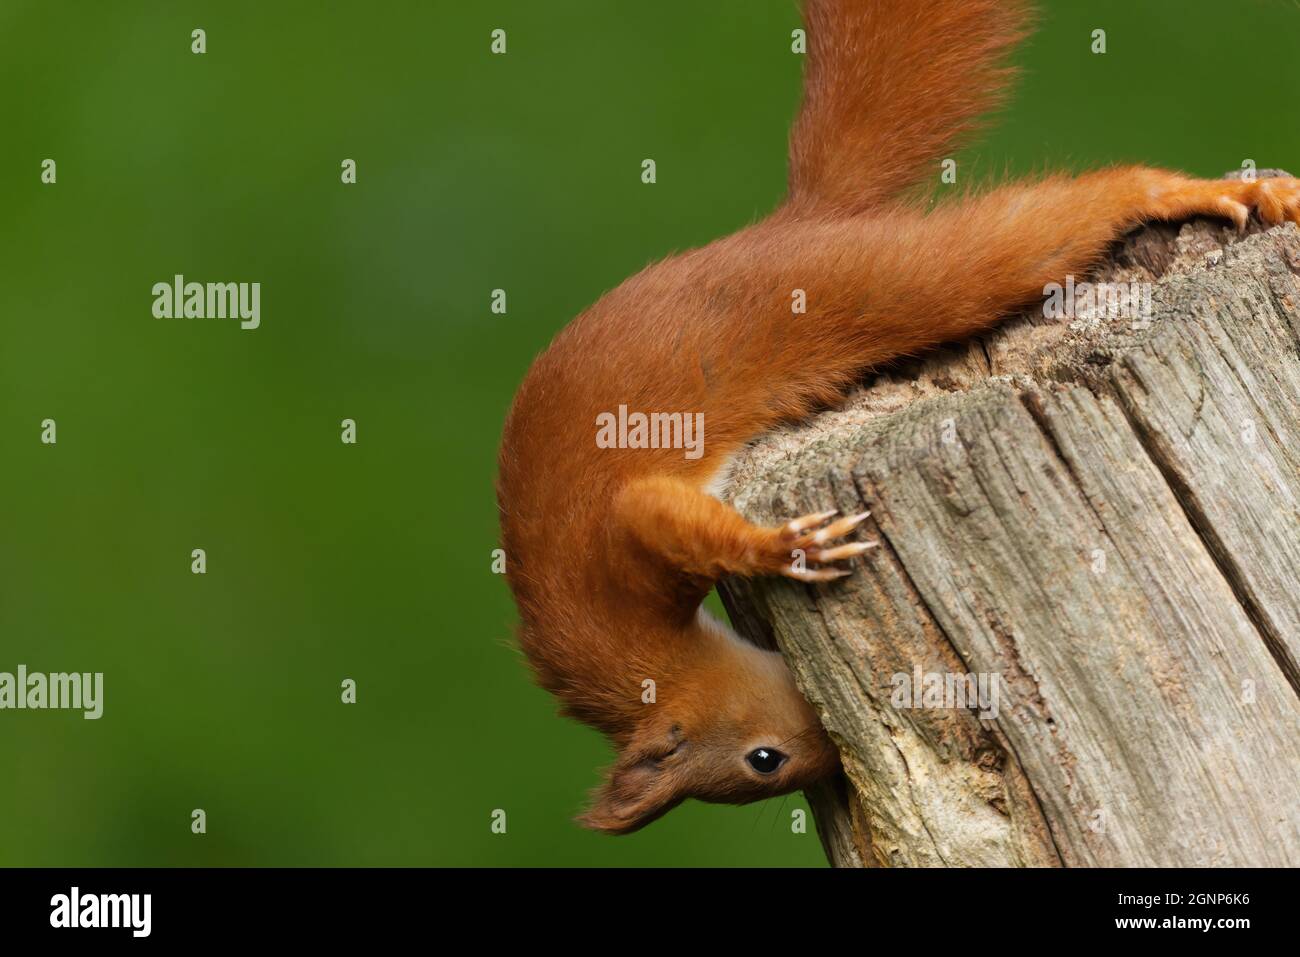 red squirrel sitting on ground Stock Photo